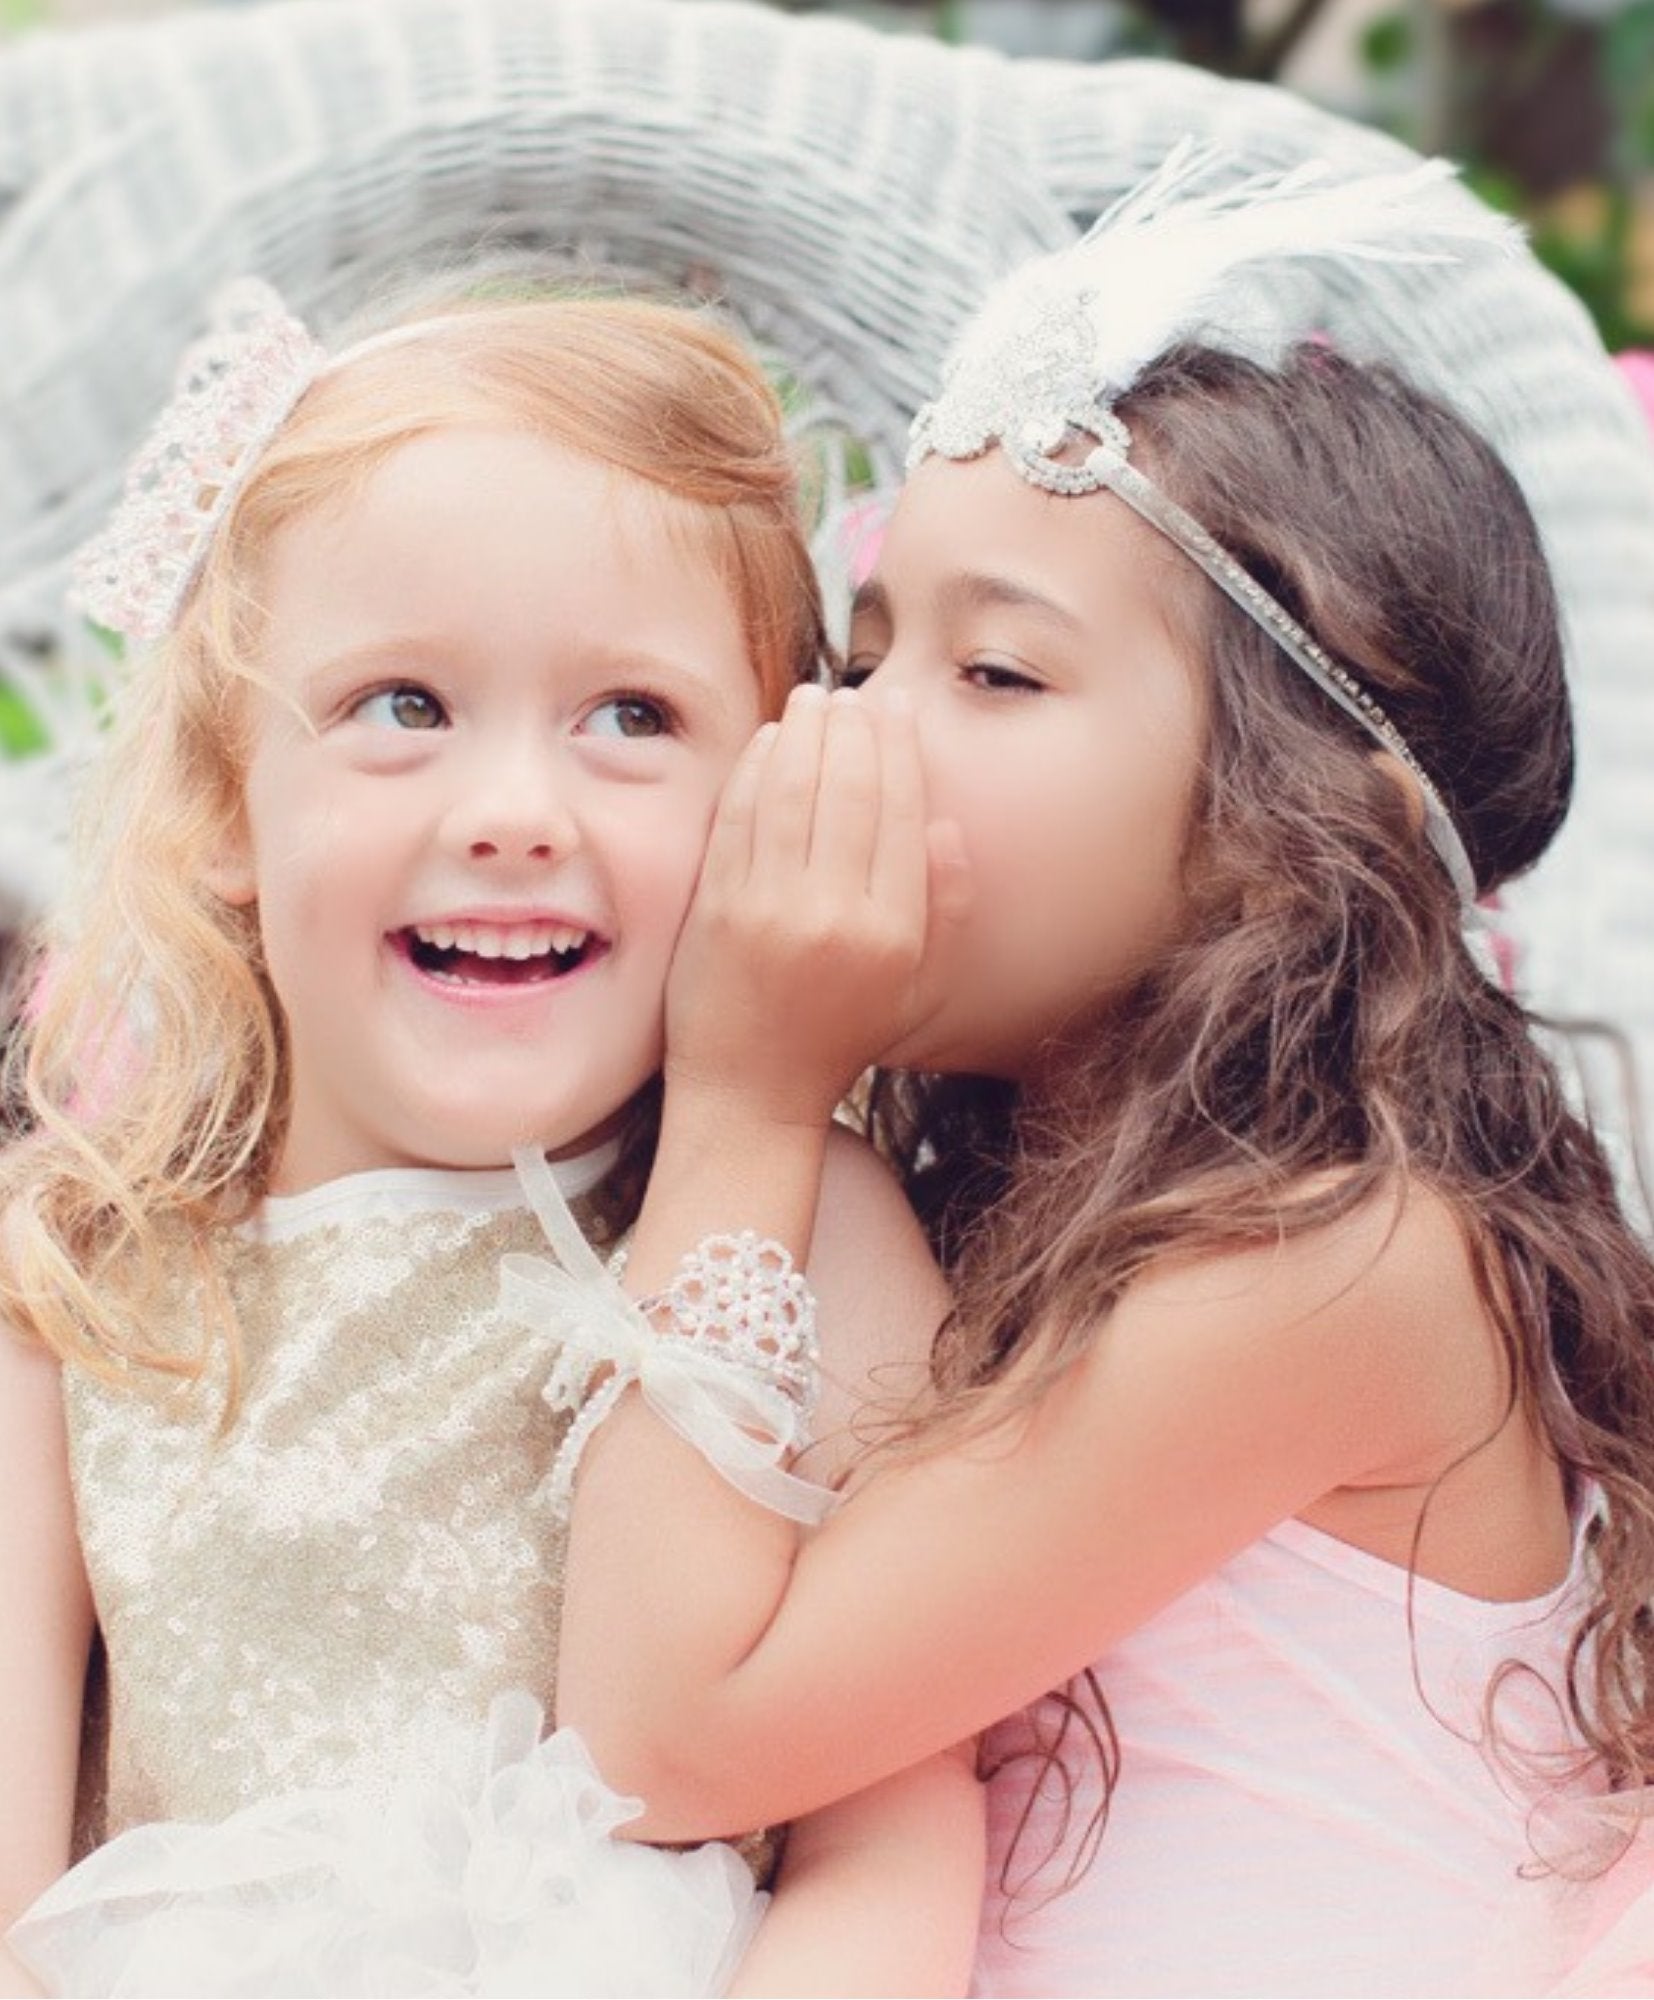 The Top 10 Developmental Benefits Of Dress-Up Play For Girls